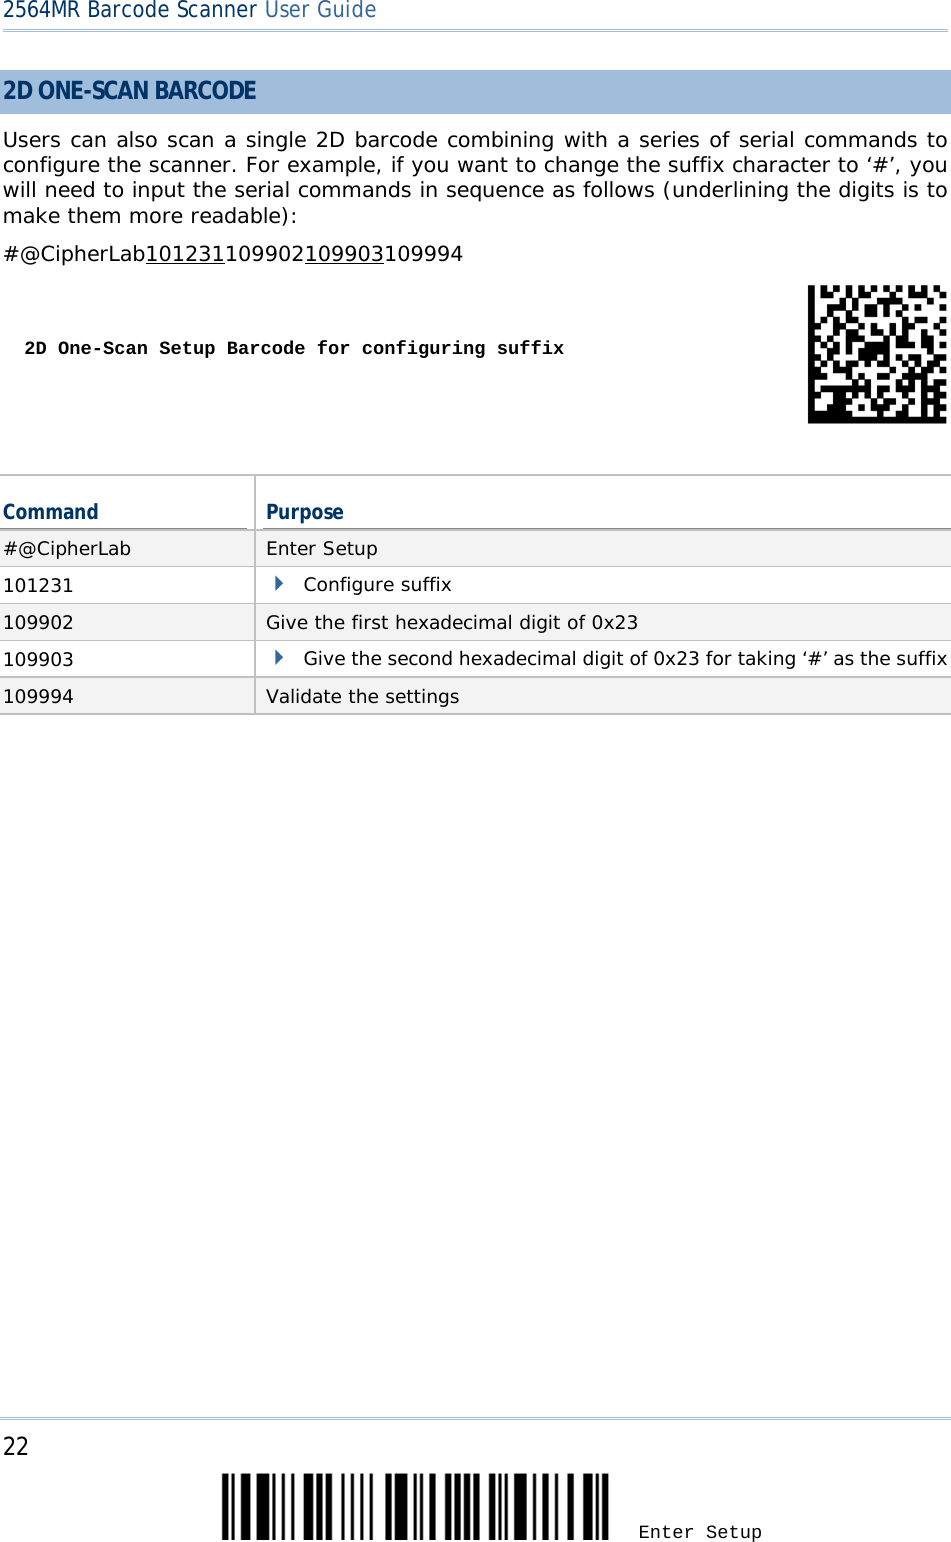 2564MR Barcode Scanner User Guide  2D ONE-SCAN BARCODE Users can also scan a single 2D barcode combining with a series of serial commands to configure the scanner. For example, if you want to change the suffix character to ‘#’, you will need to input the serial commands in sequence as follows (underlining the digits is to make them more readable): #@CipherLab101231109902109903109994   2D One-Scan Setup Barcode for configuring suffix   Command Purpose #@CipherLab Enter Setup 101231  Configure suffix 109902  Give the first hexadecimal digit of 0x23 109903  Give the second hexadecimal digit of 0x23 for taking ‘#’ as the suffix 109994 Validate the settings  22 Enter Setup 